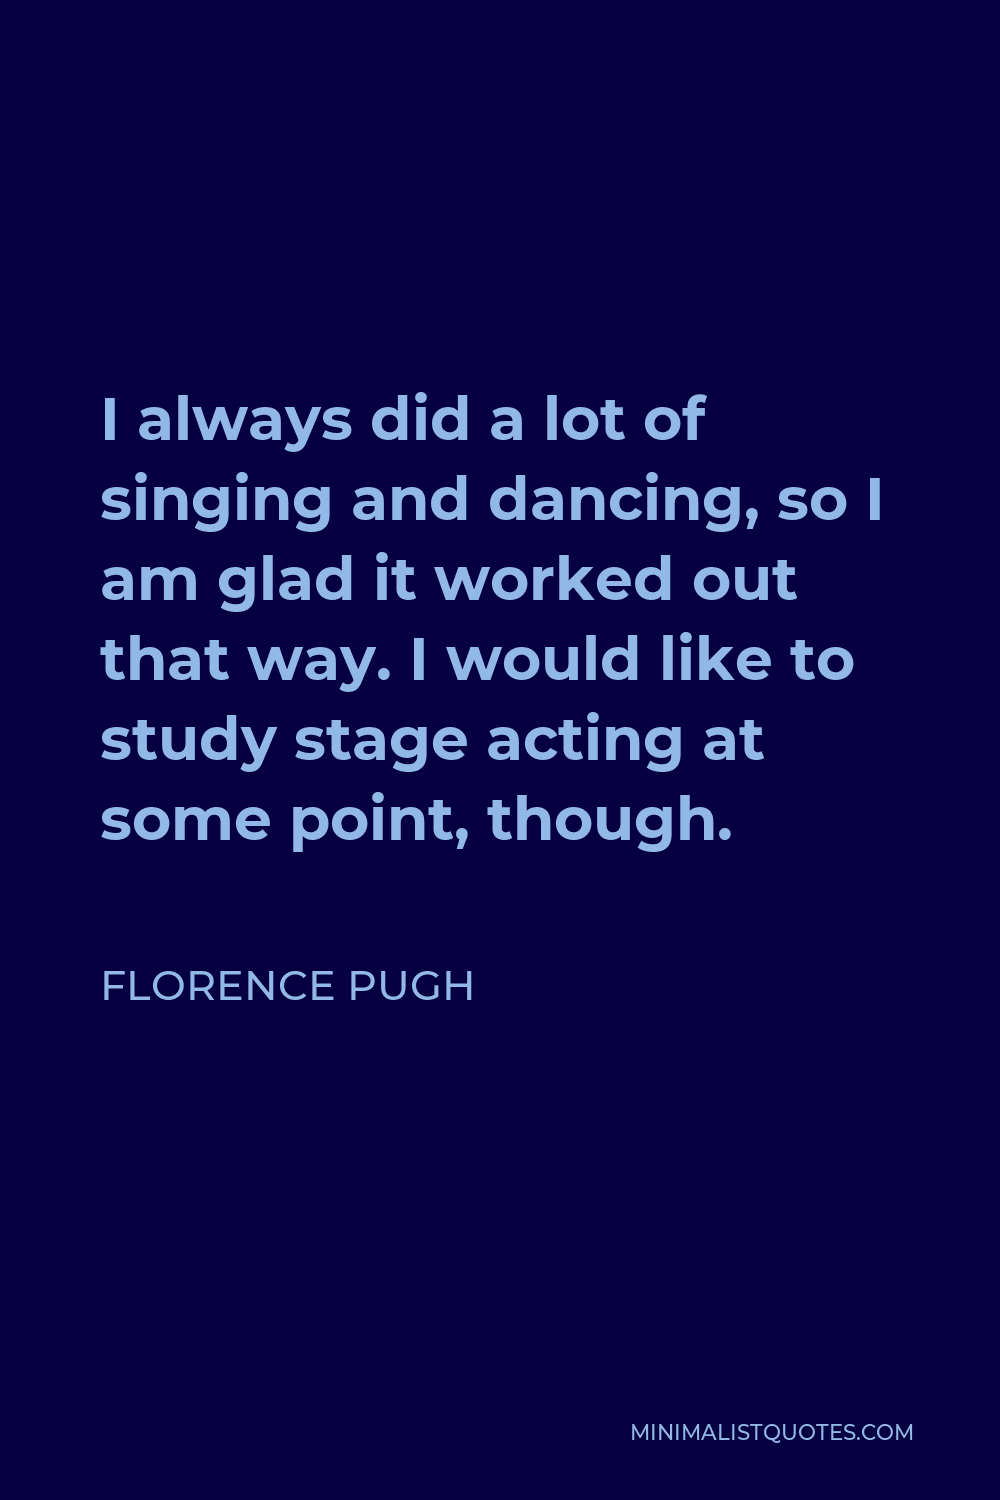 Florence Pugh Quote - I always did a lot of singing and dancing, so I am glad it worked out that way. I would like to study stage acting at some point, though.